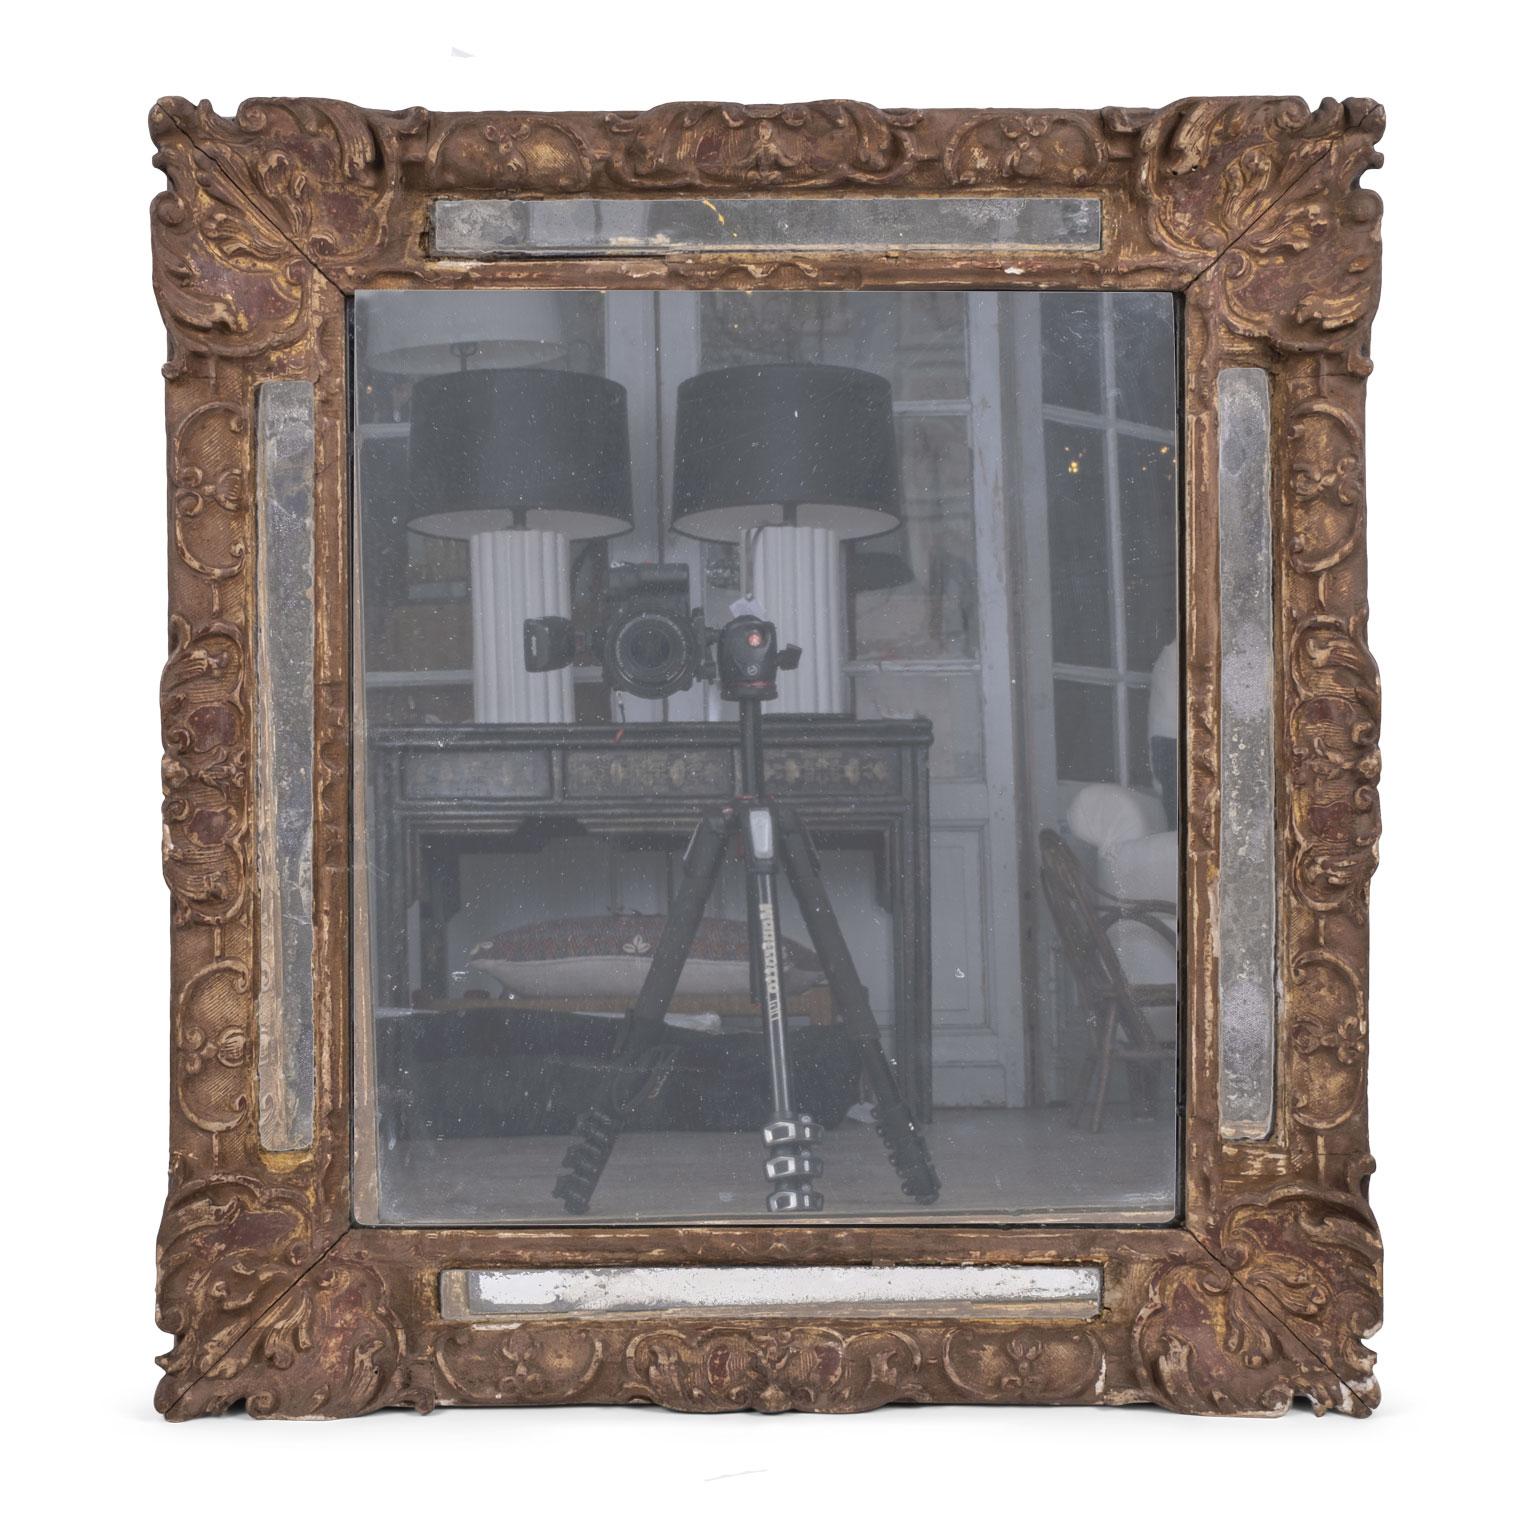 Early 18th century French giltwood mirror in Regence style, circa 1730-1750. Marginal mirror plates border a larger central mirror plate on all sides set within embellished giltwood moldings. The frame is carved with strapwork, foliage and flowers,